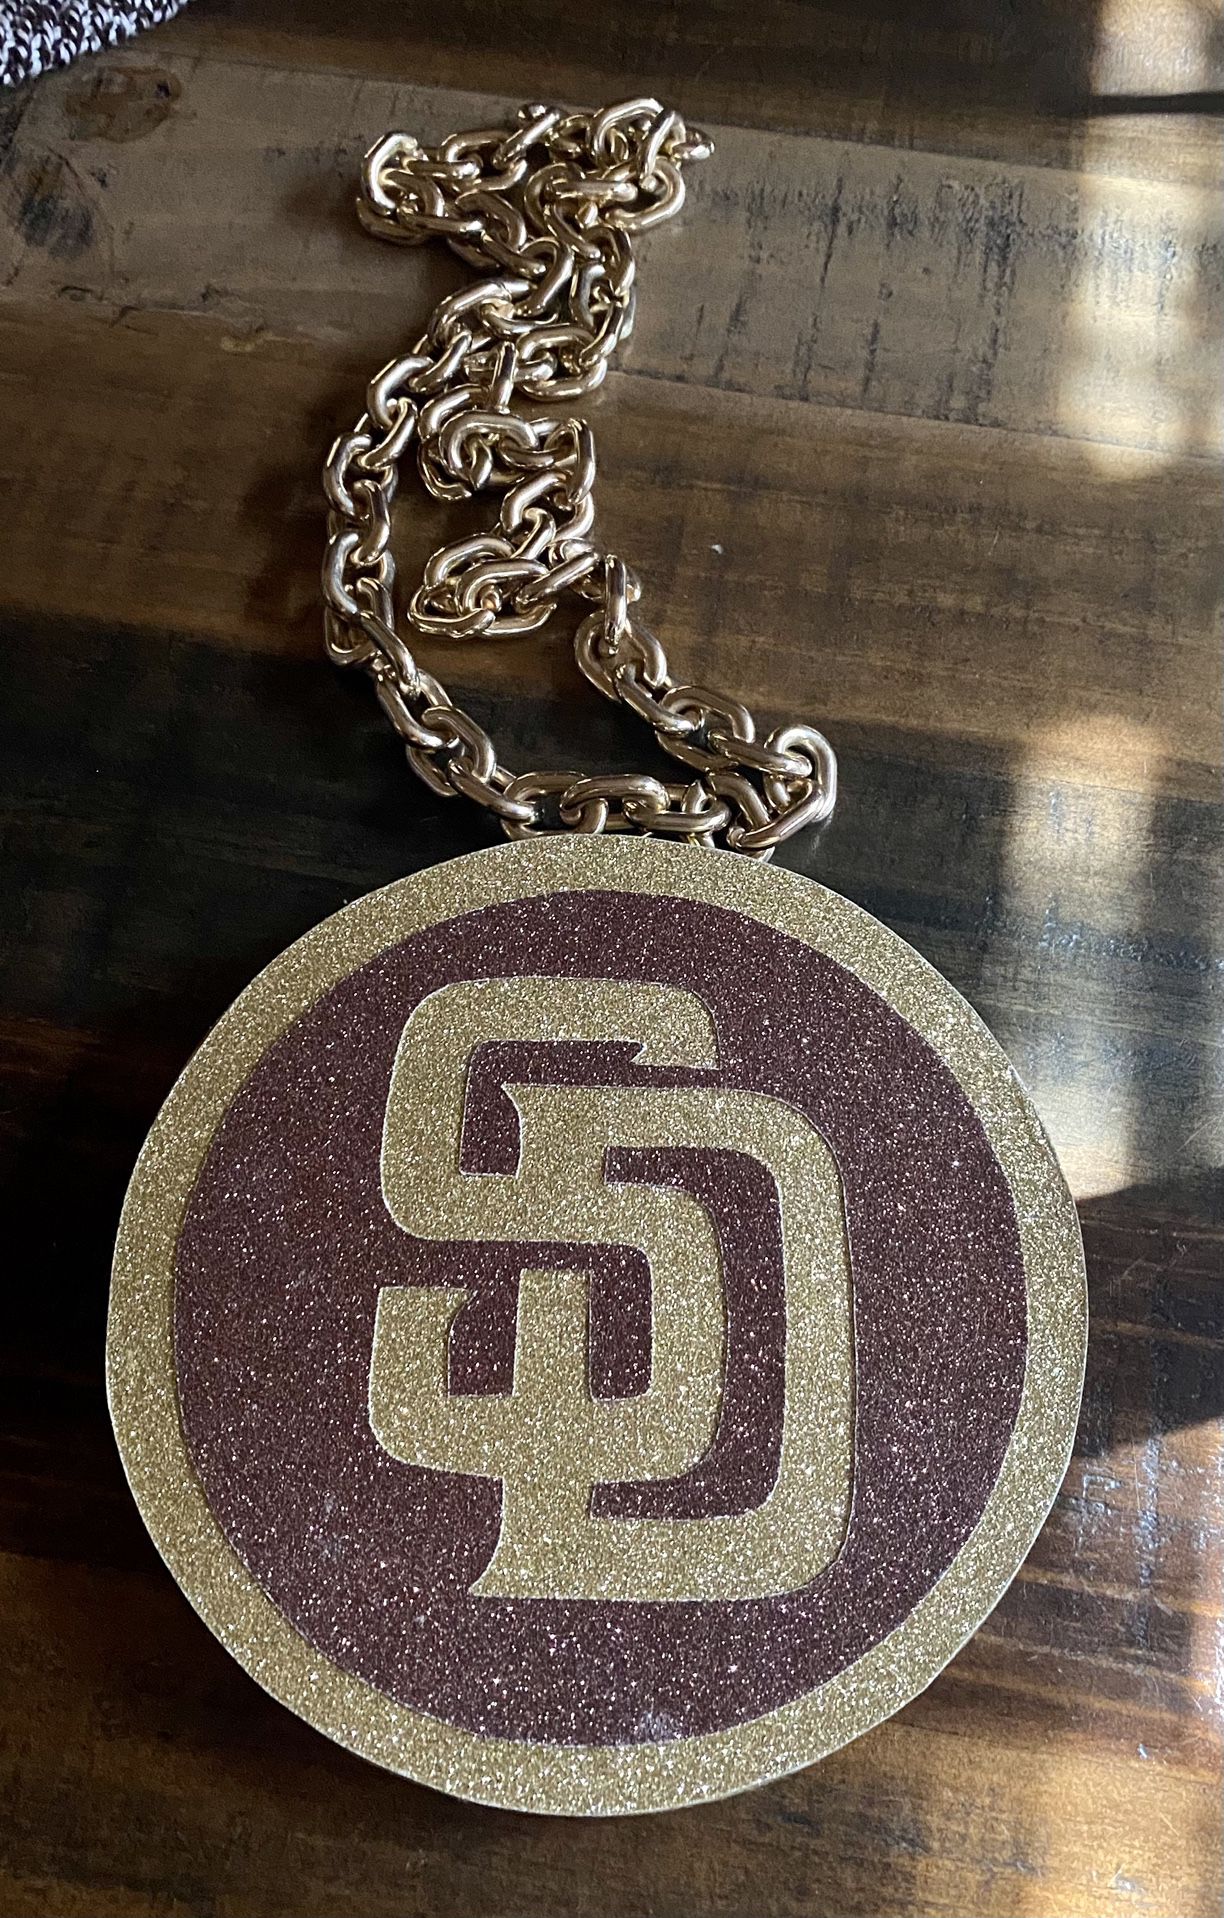 SD Padre Swag Chain That Spins for Sale in San Diego, CA - OfferUp